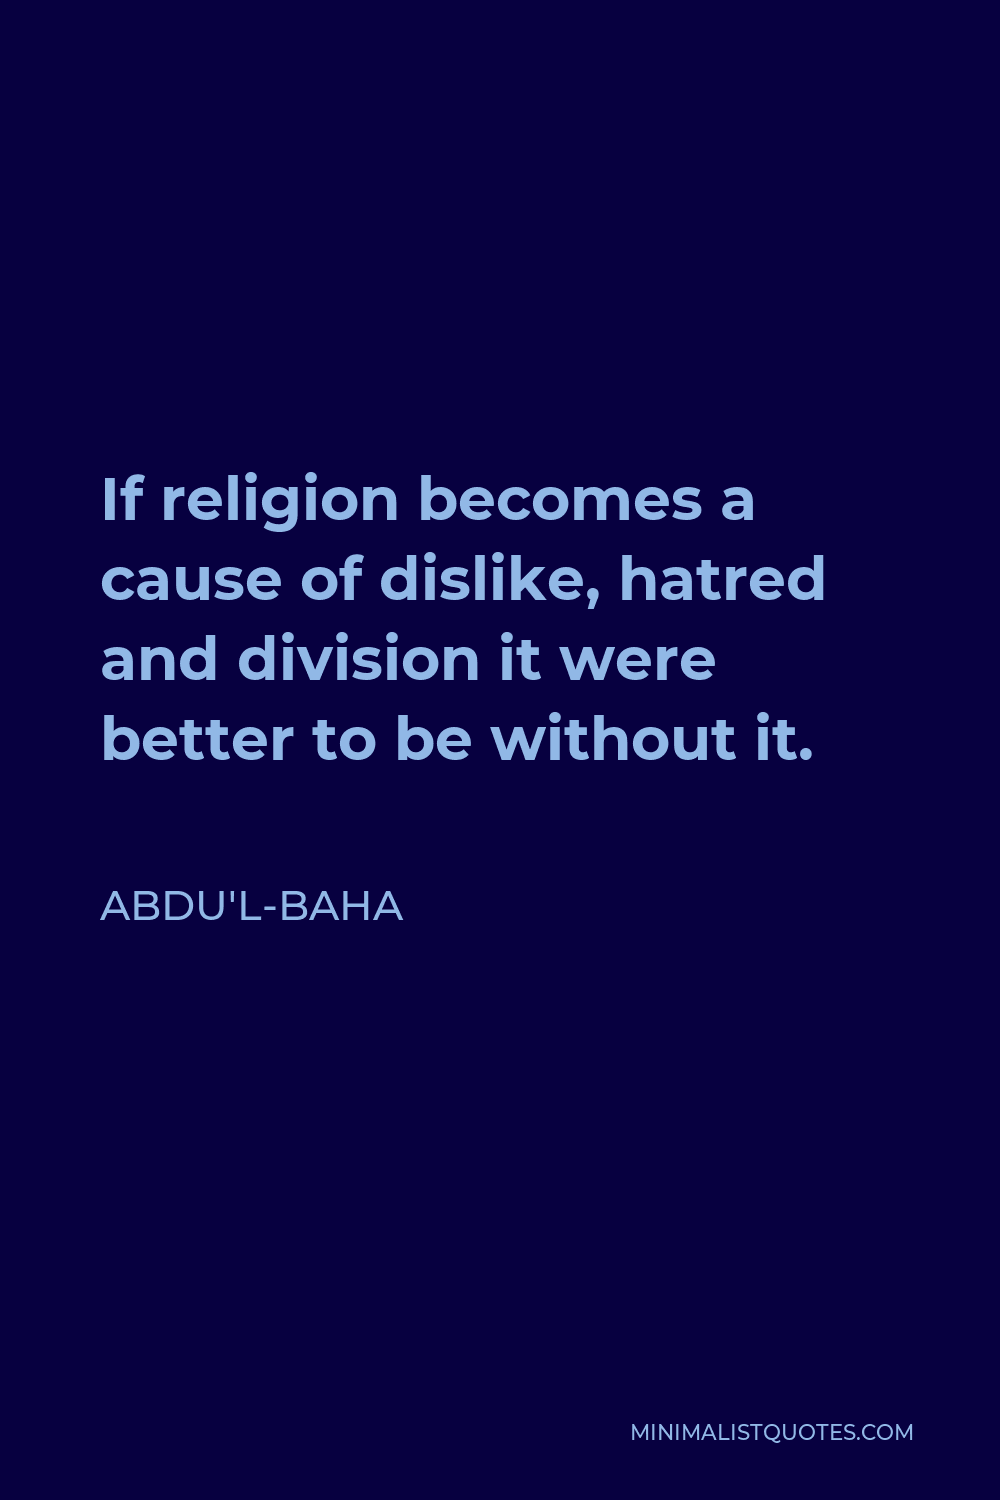 Abdu'l-Baha Quote - If religion becomes a cause of dislike, hatred and division, it would be better to be without it… Any religion which is not a cause of love and unity is no religion.